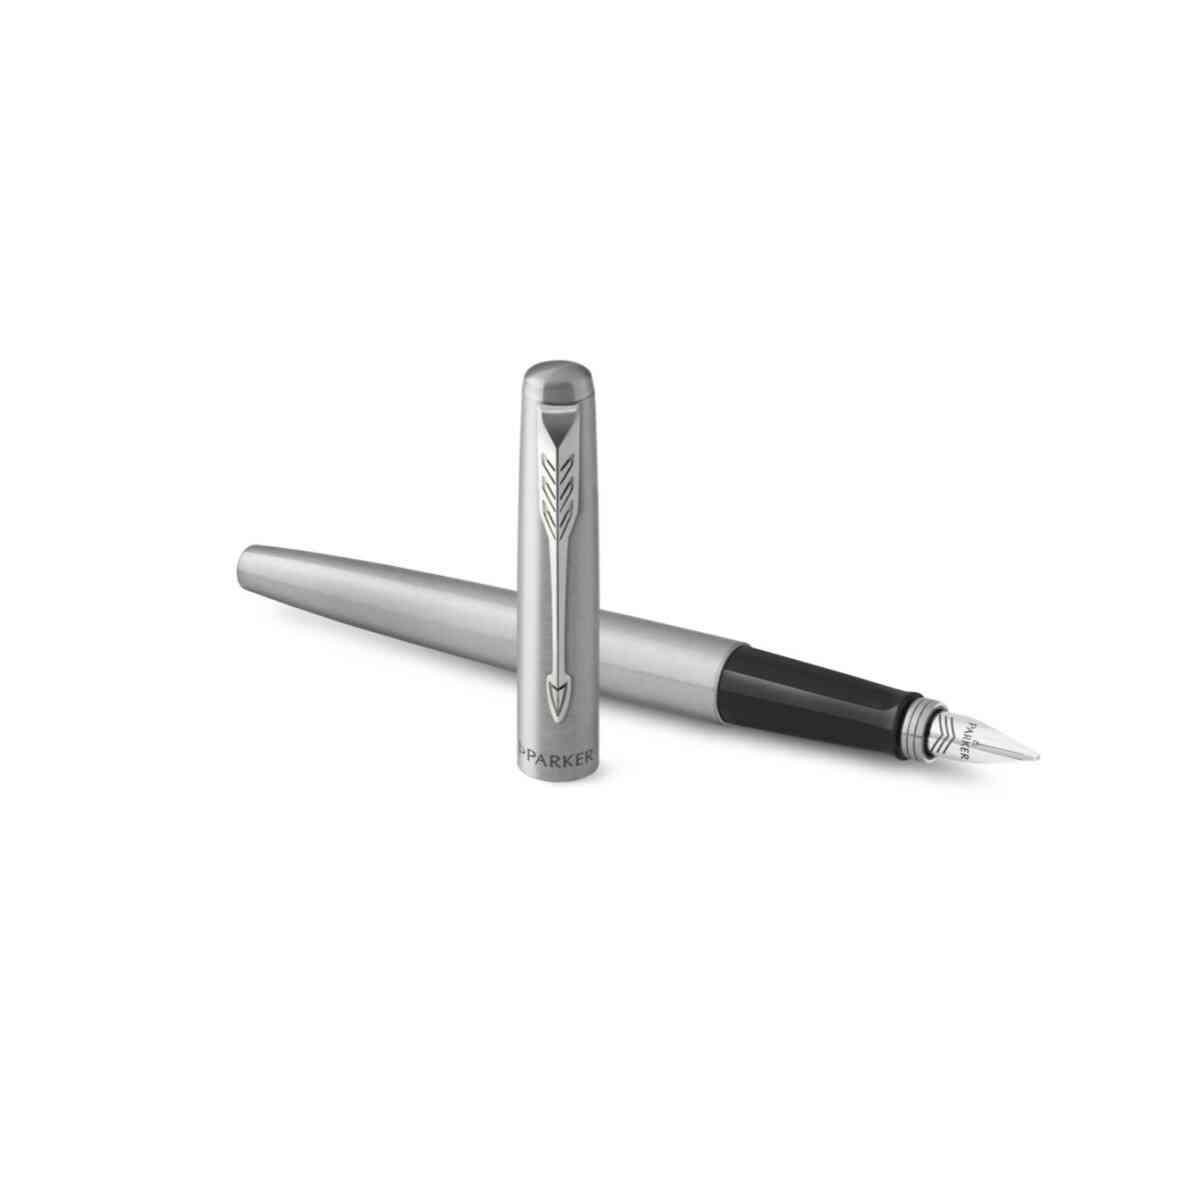 Parker jotter fp stainless